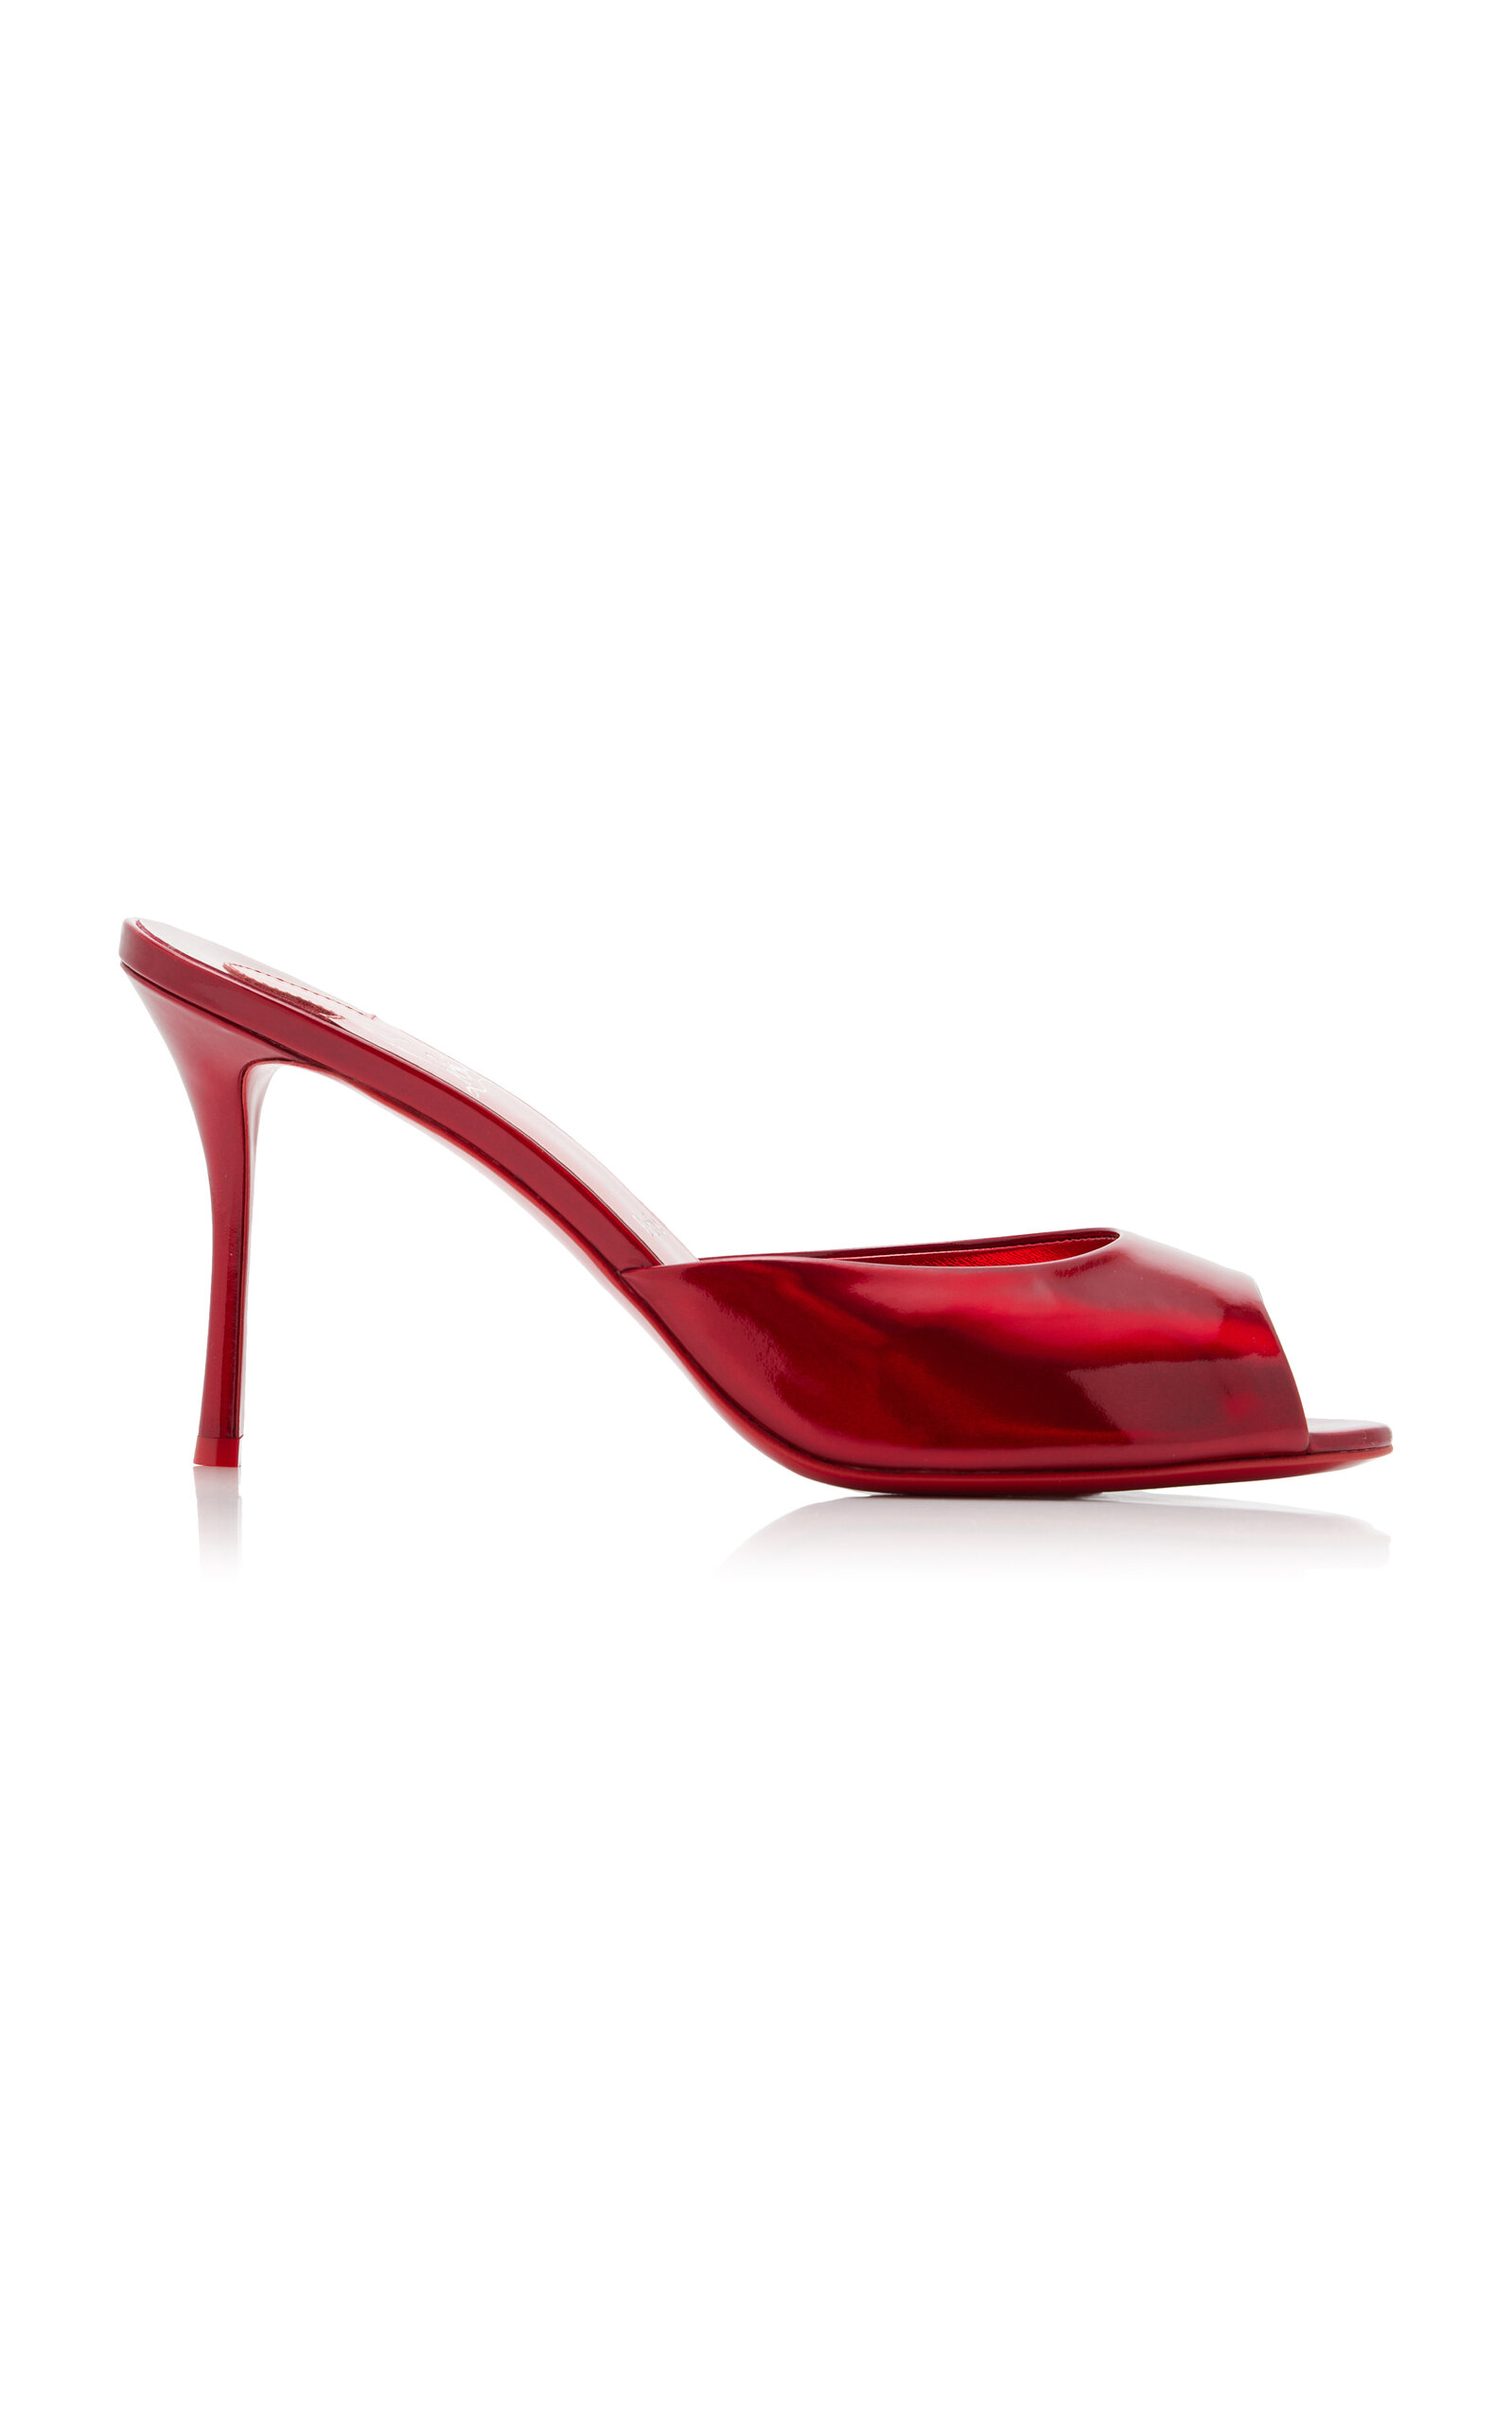 Christian Louboutin Women's Me Dolly Patent Leather High-heel Sandals In Red